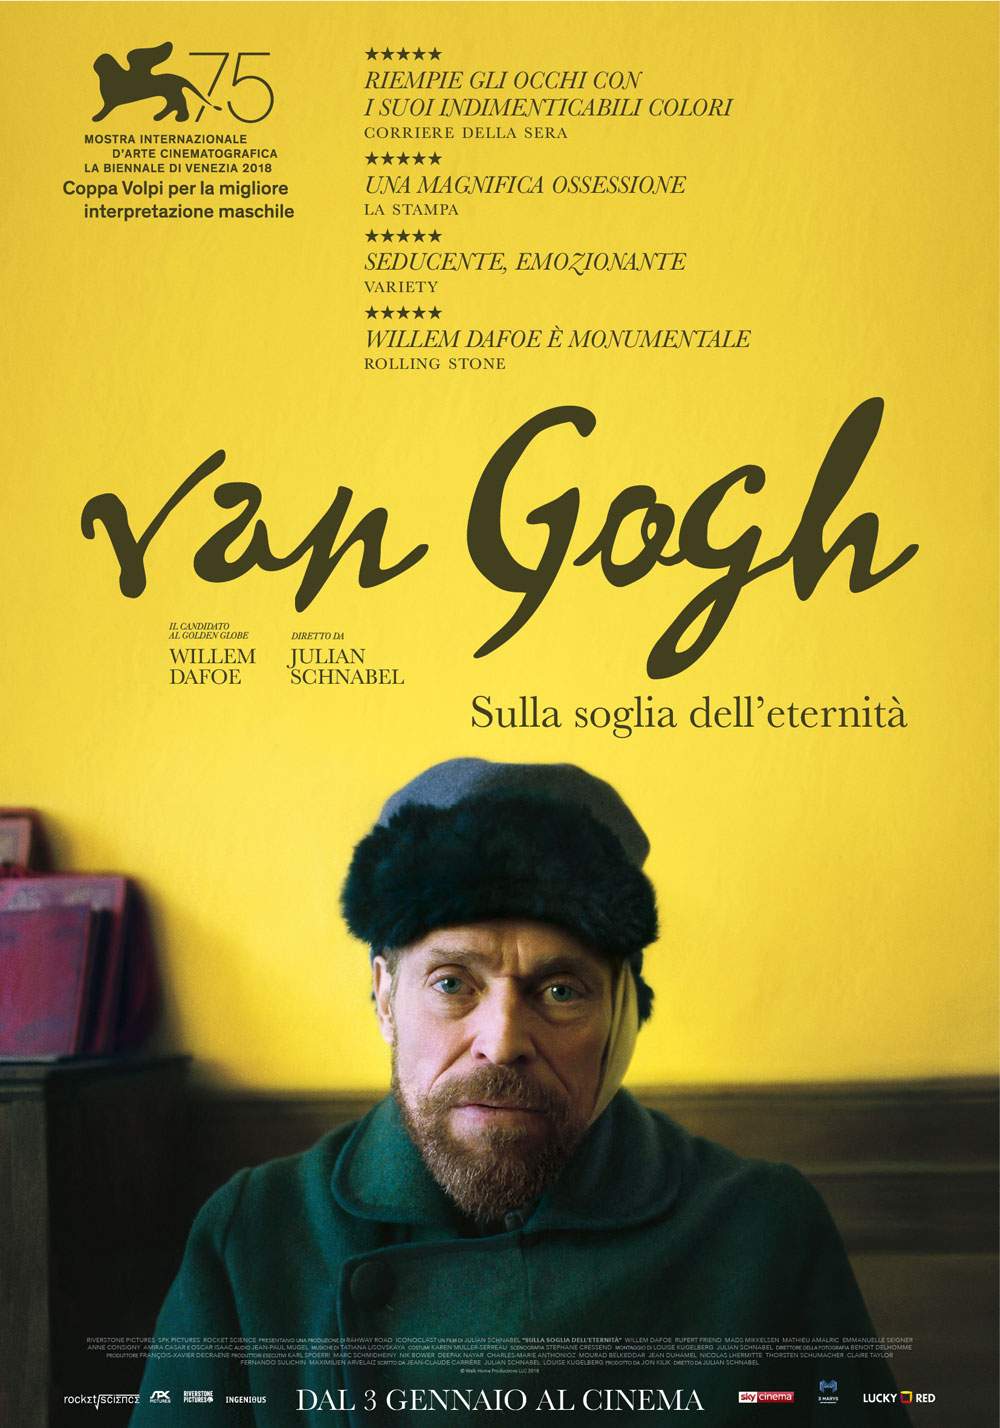 Box office record: over a million box office receipts for Van Gogh - On the Threshold of Eternity